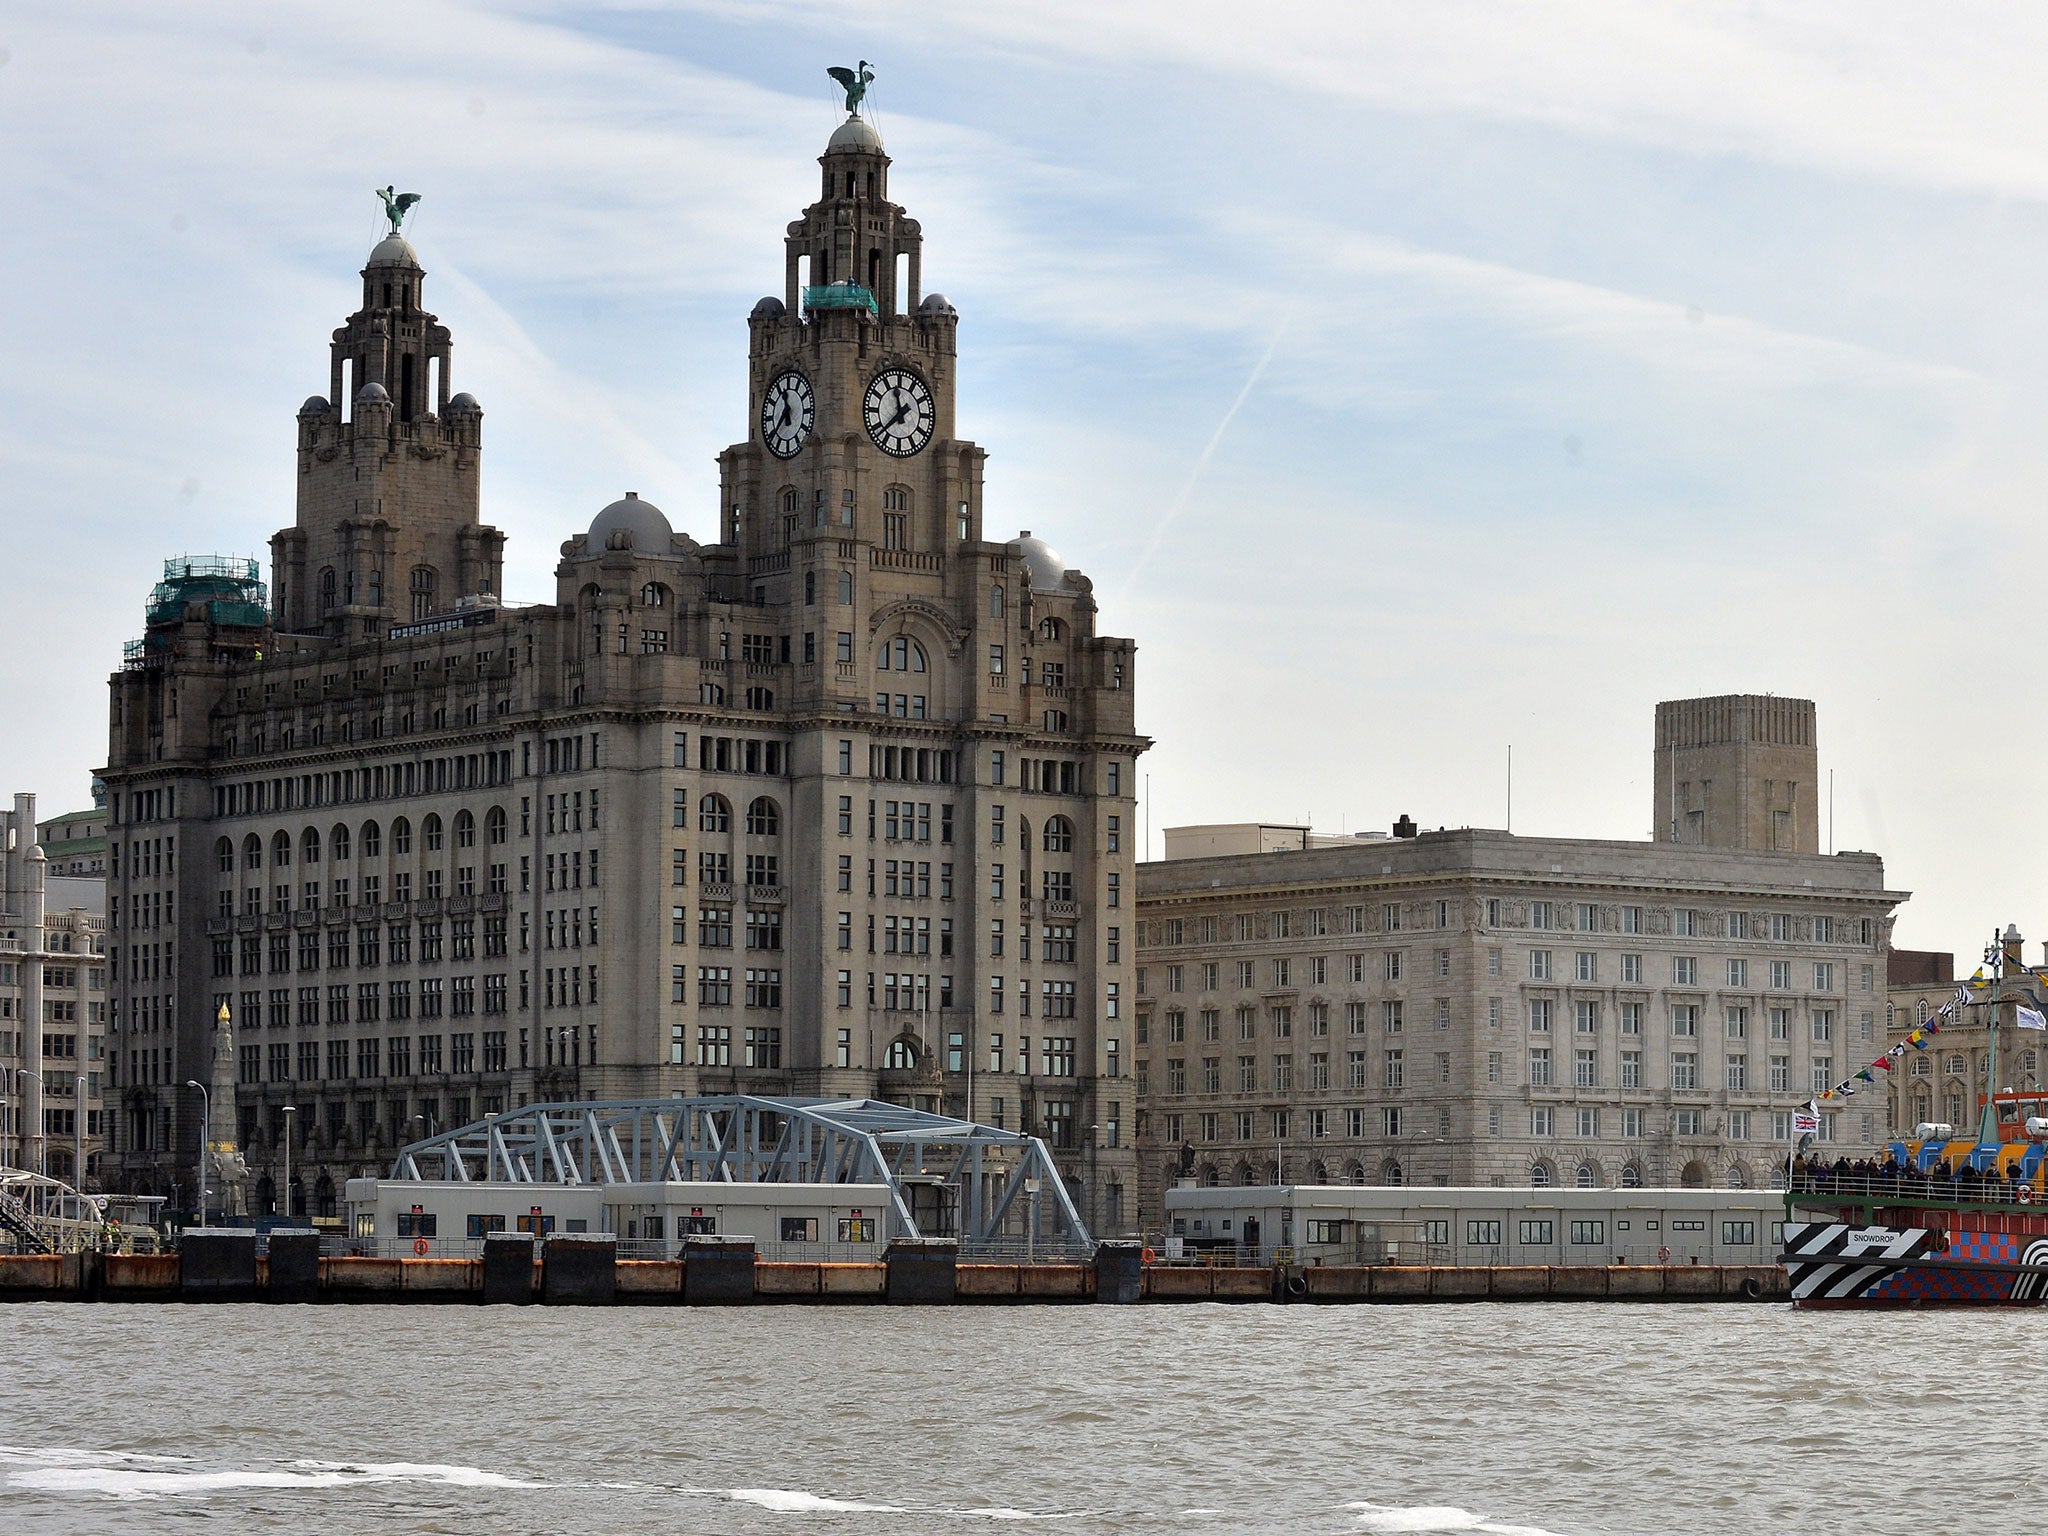 The River Mersey in front of the Royal Liver Building in Liverpool